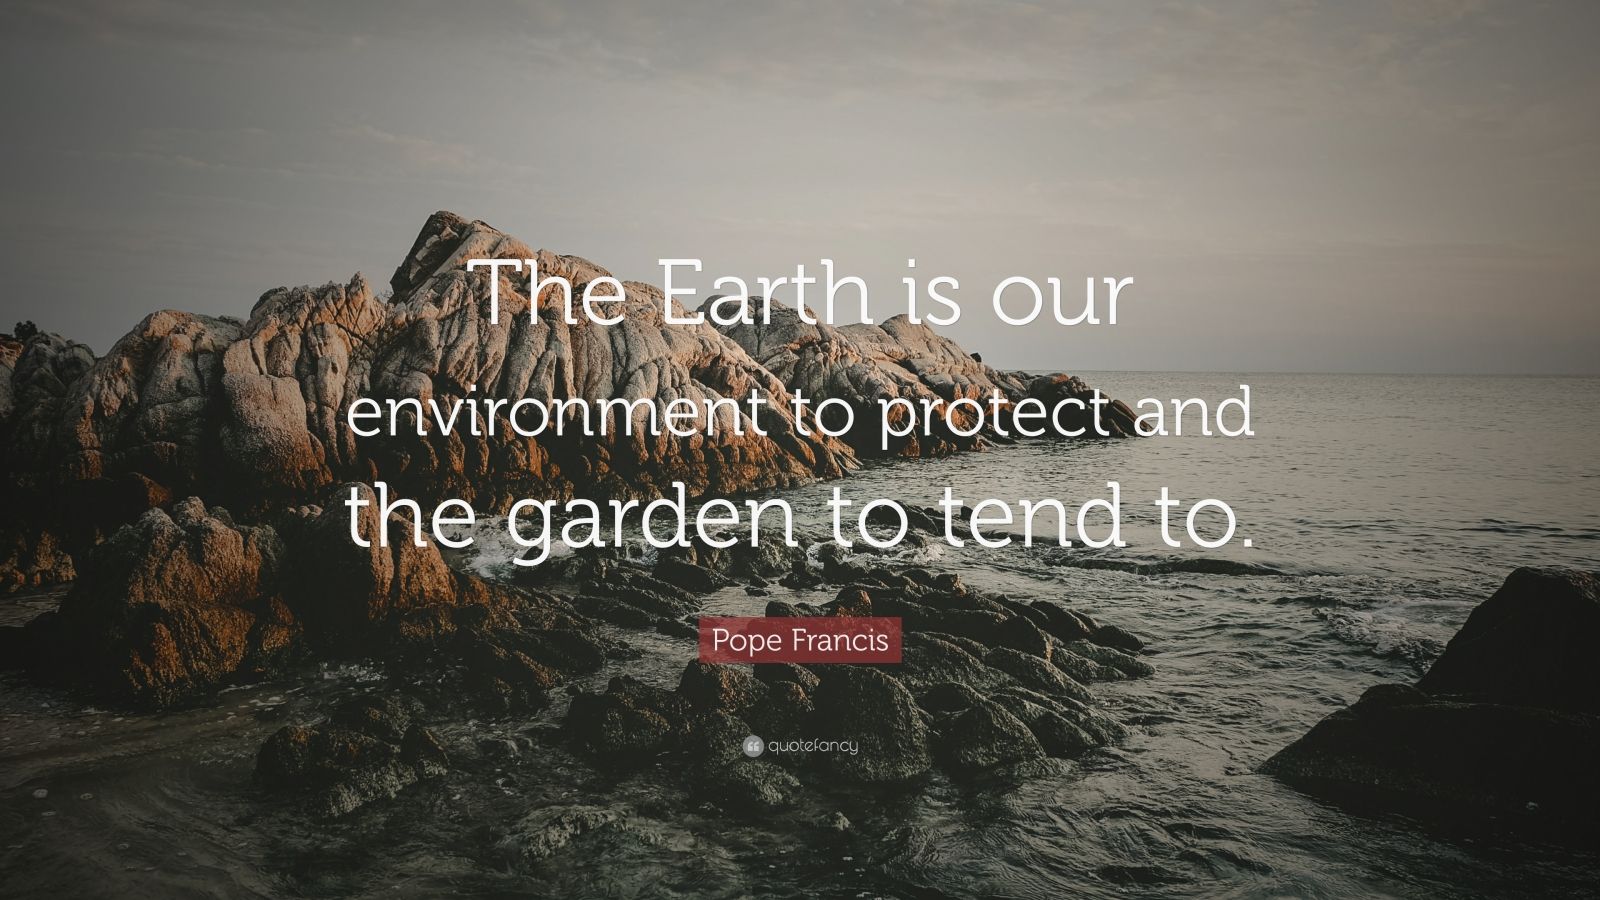 Pope Francis Quote: “The Earth is our environment to protect and the